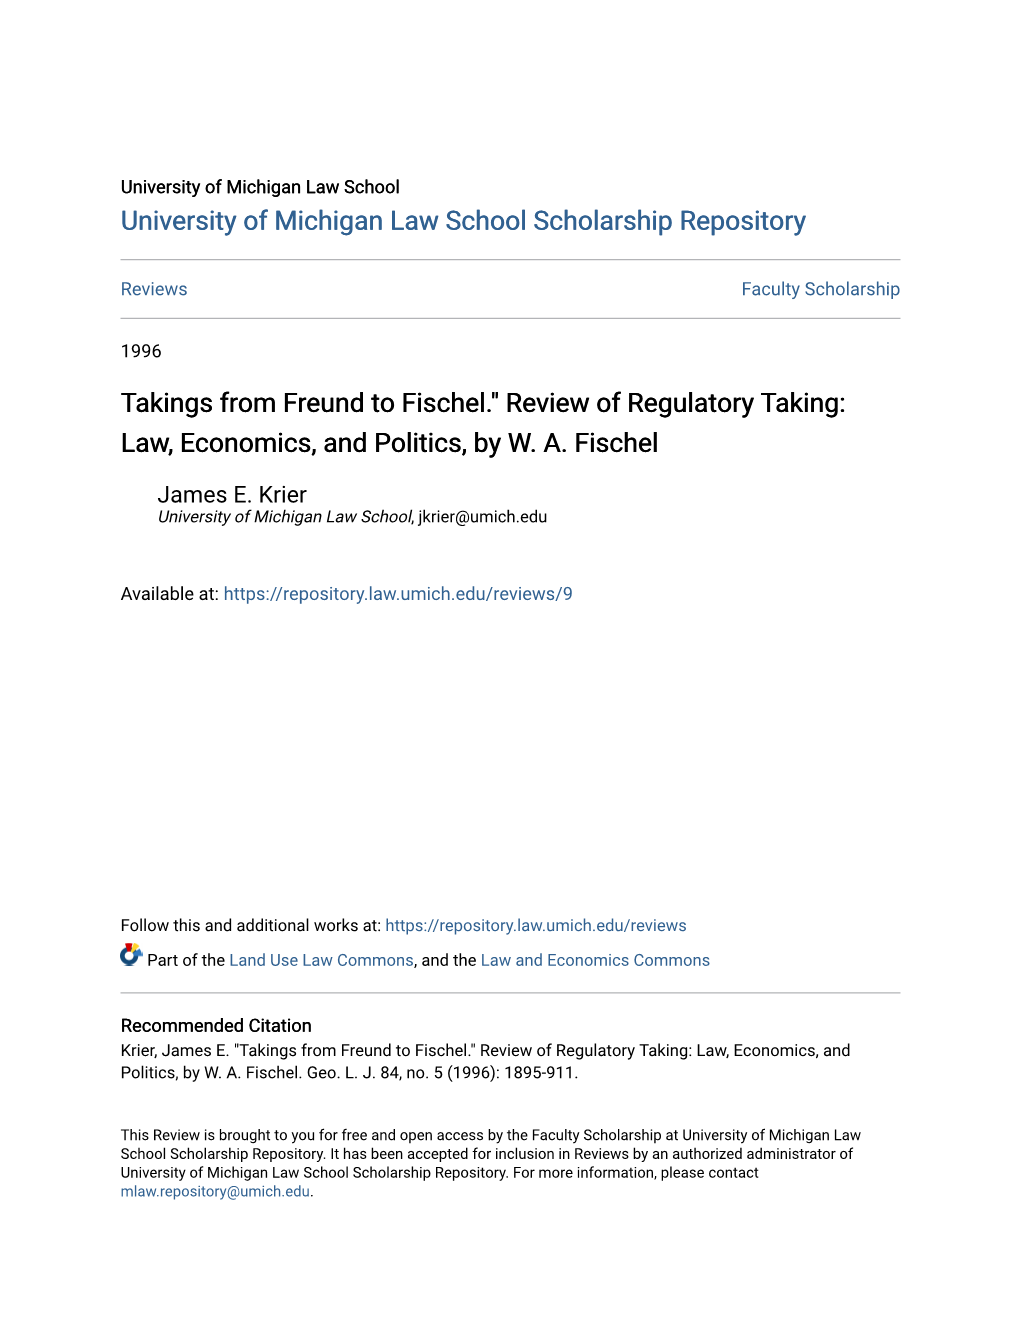 Takings from Freund to Fischel." Review of Regulatory Taking: Law, Economics, and Politics, by W